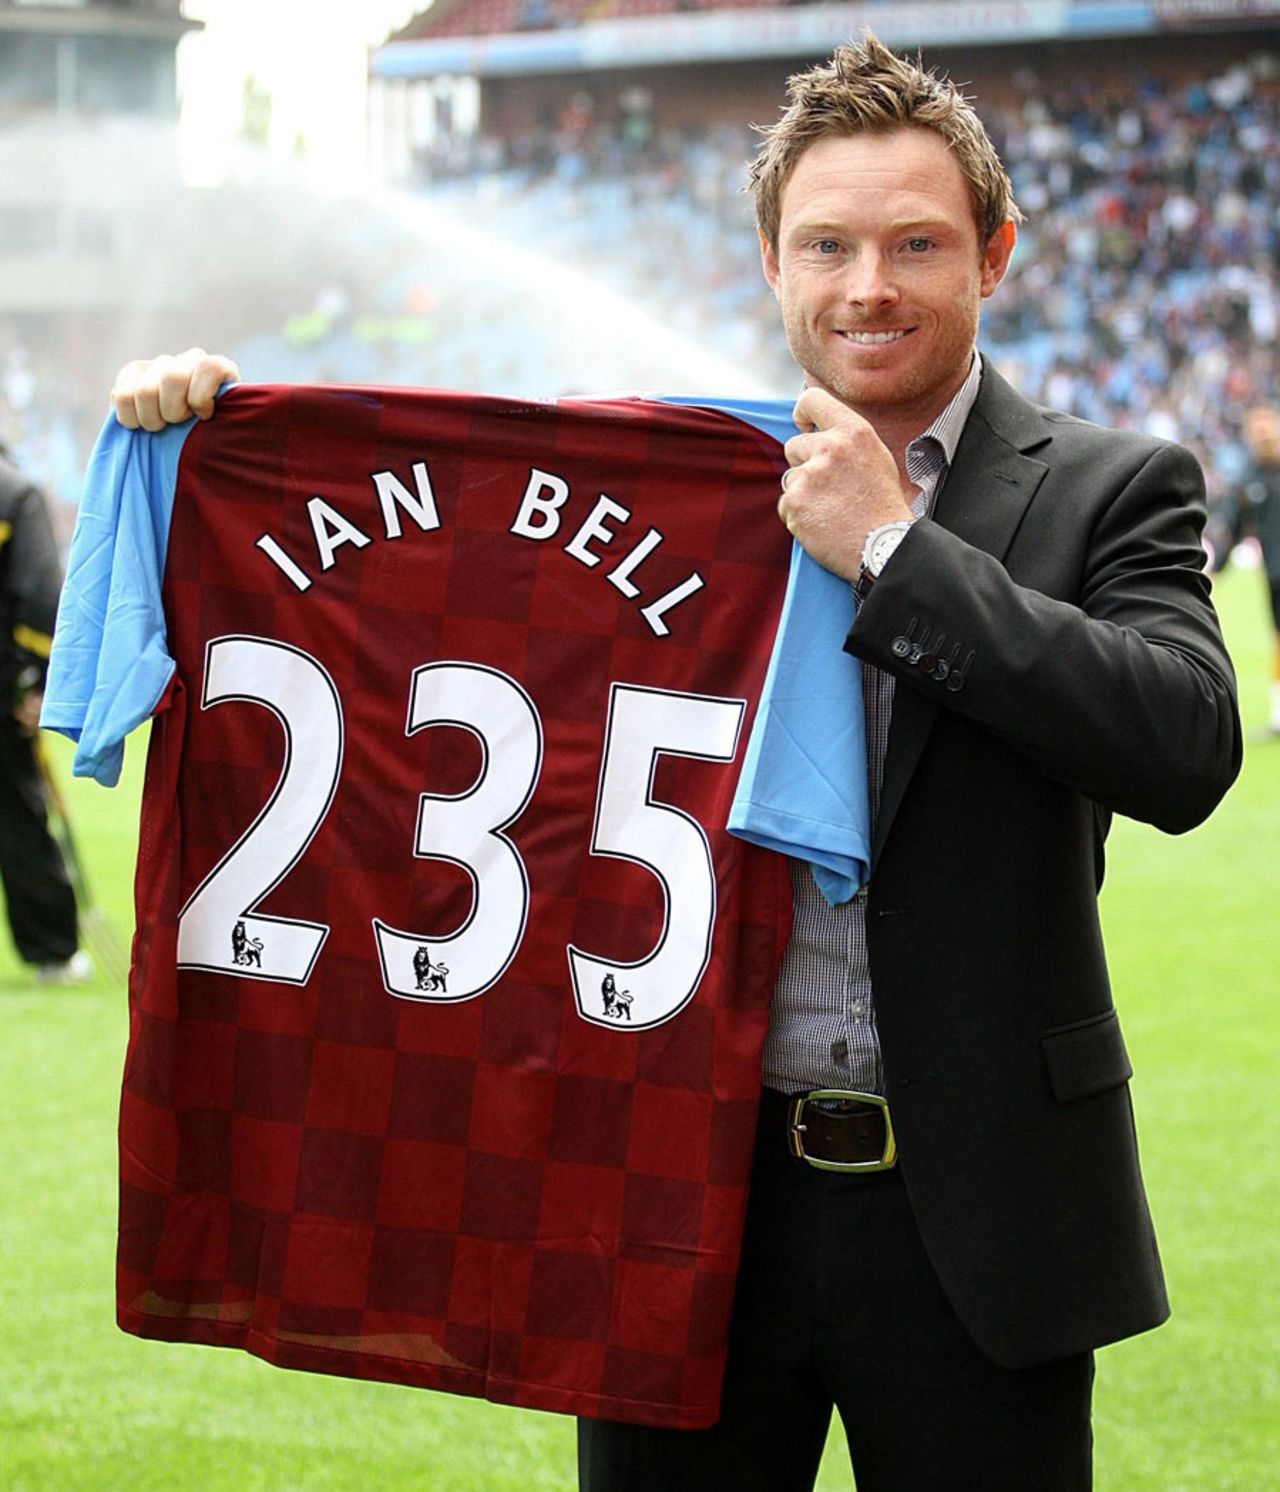 Ian Bell with a shirt of Aston Villa football club signifying his highest Test score, Birmingham, August 27, 2011